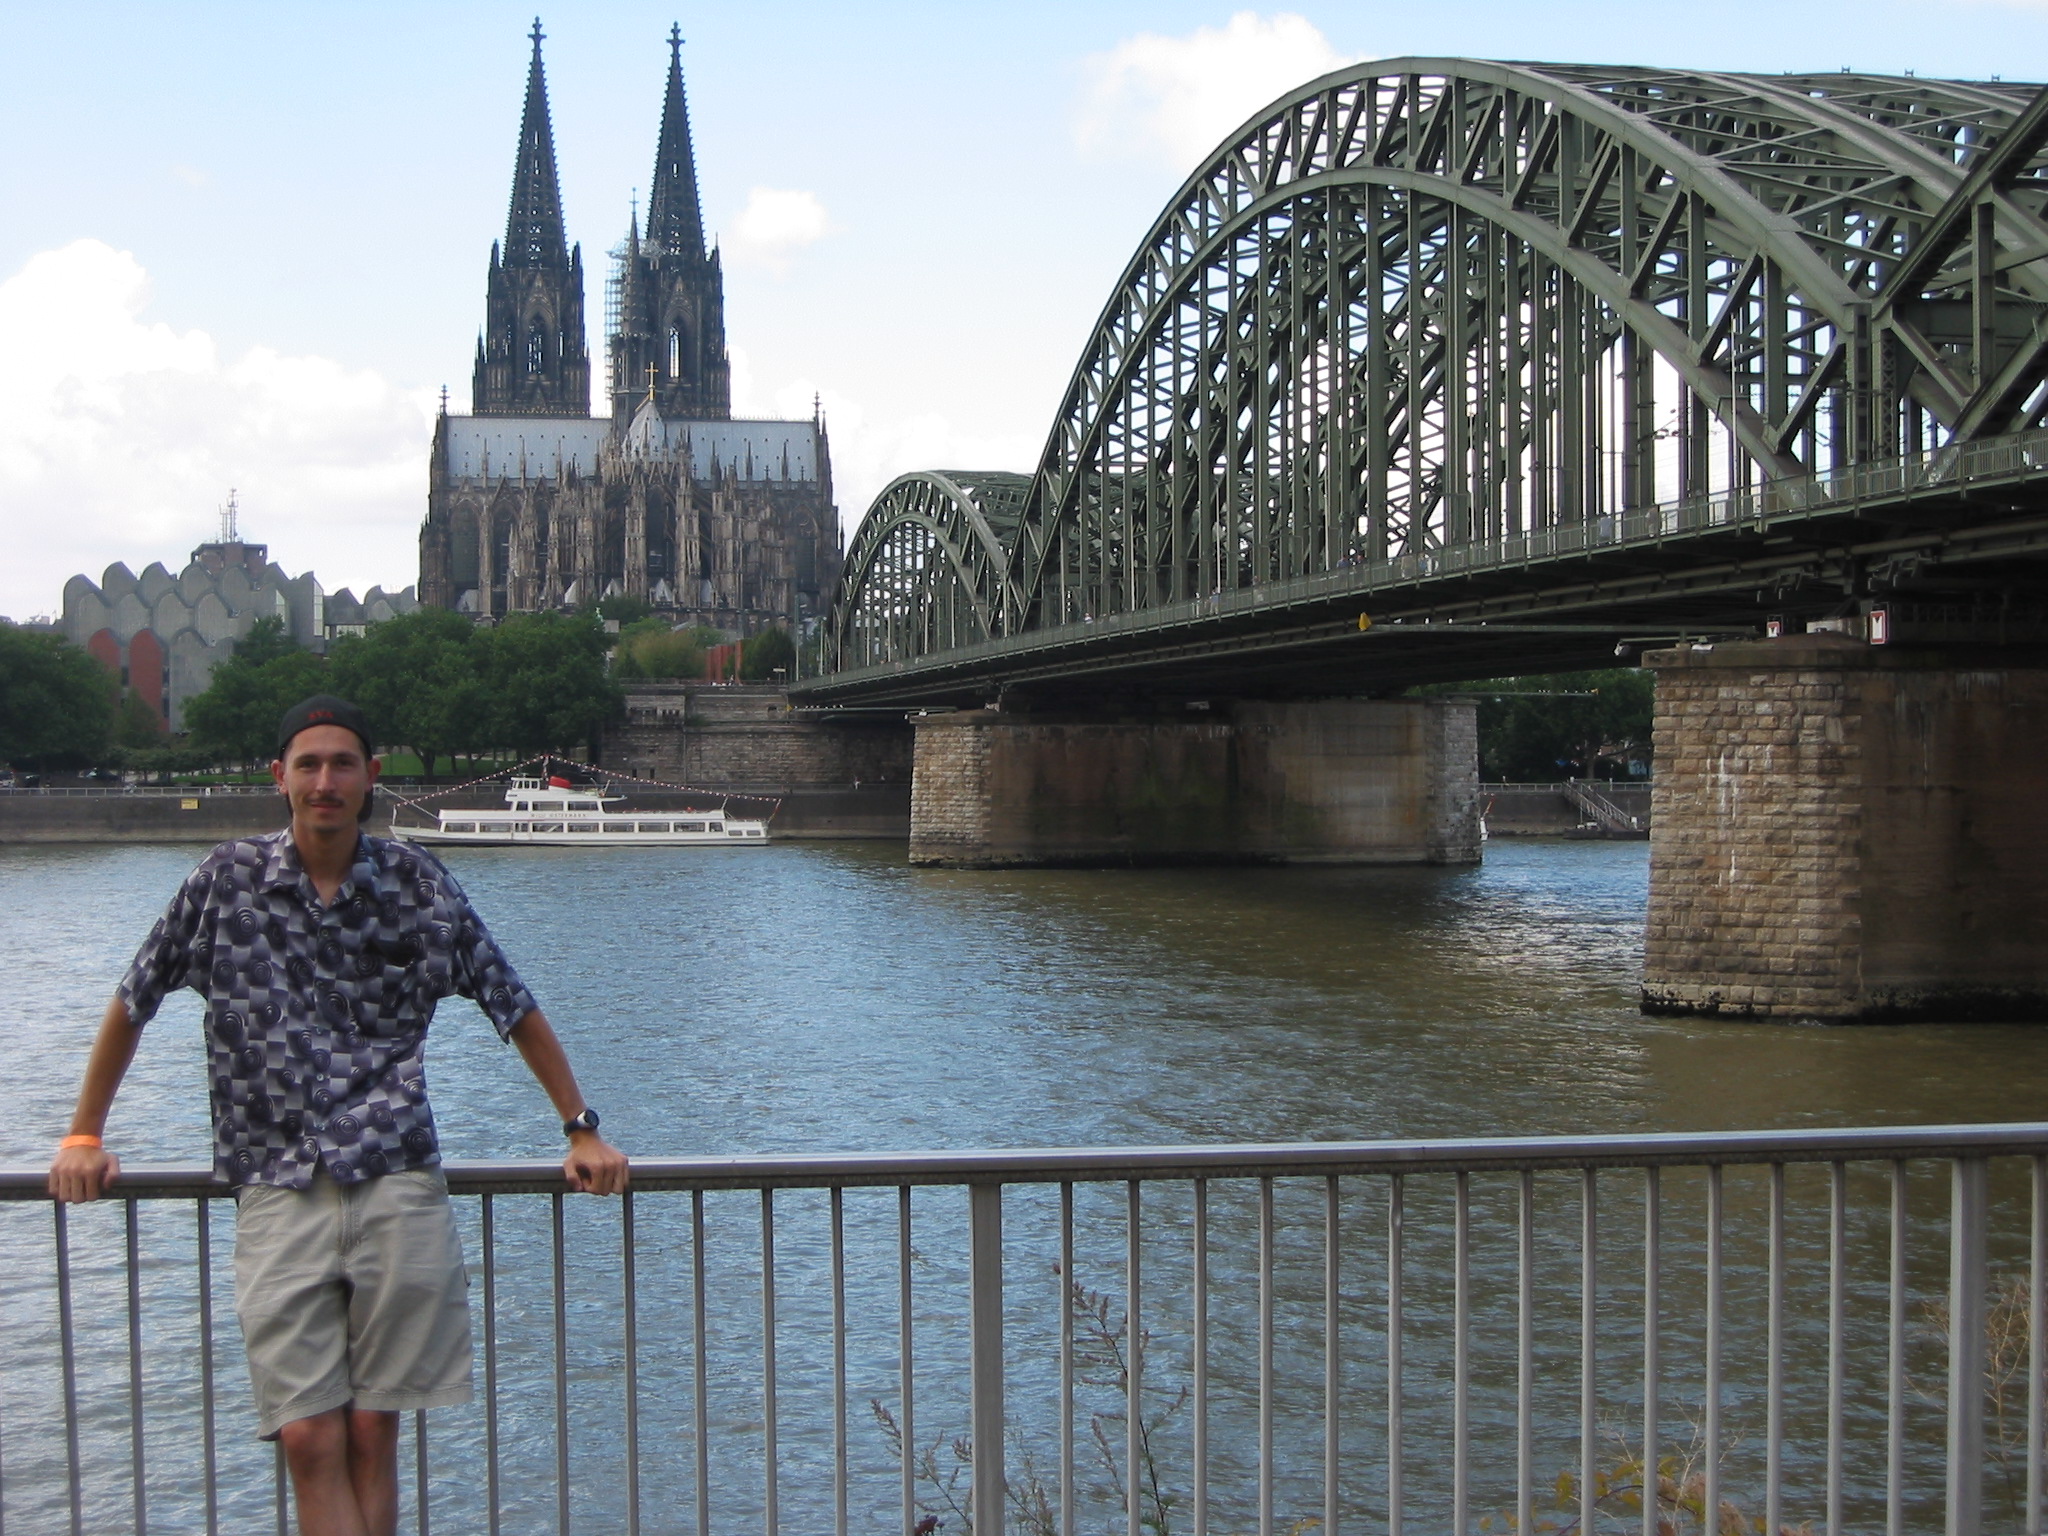 View of Cologne from across the river